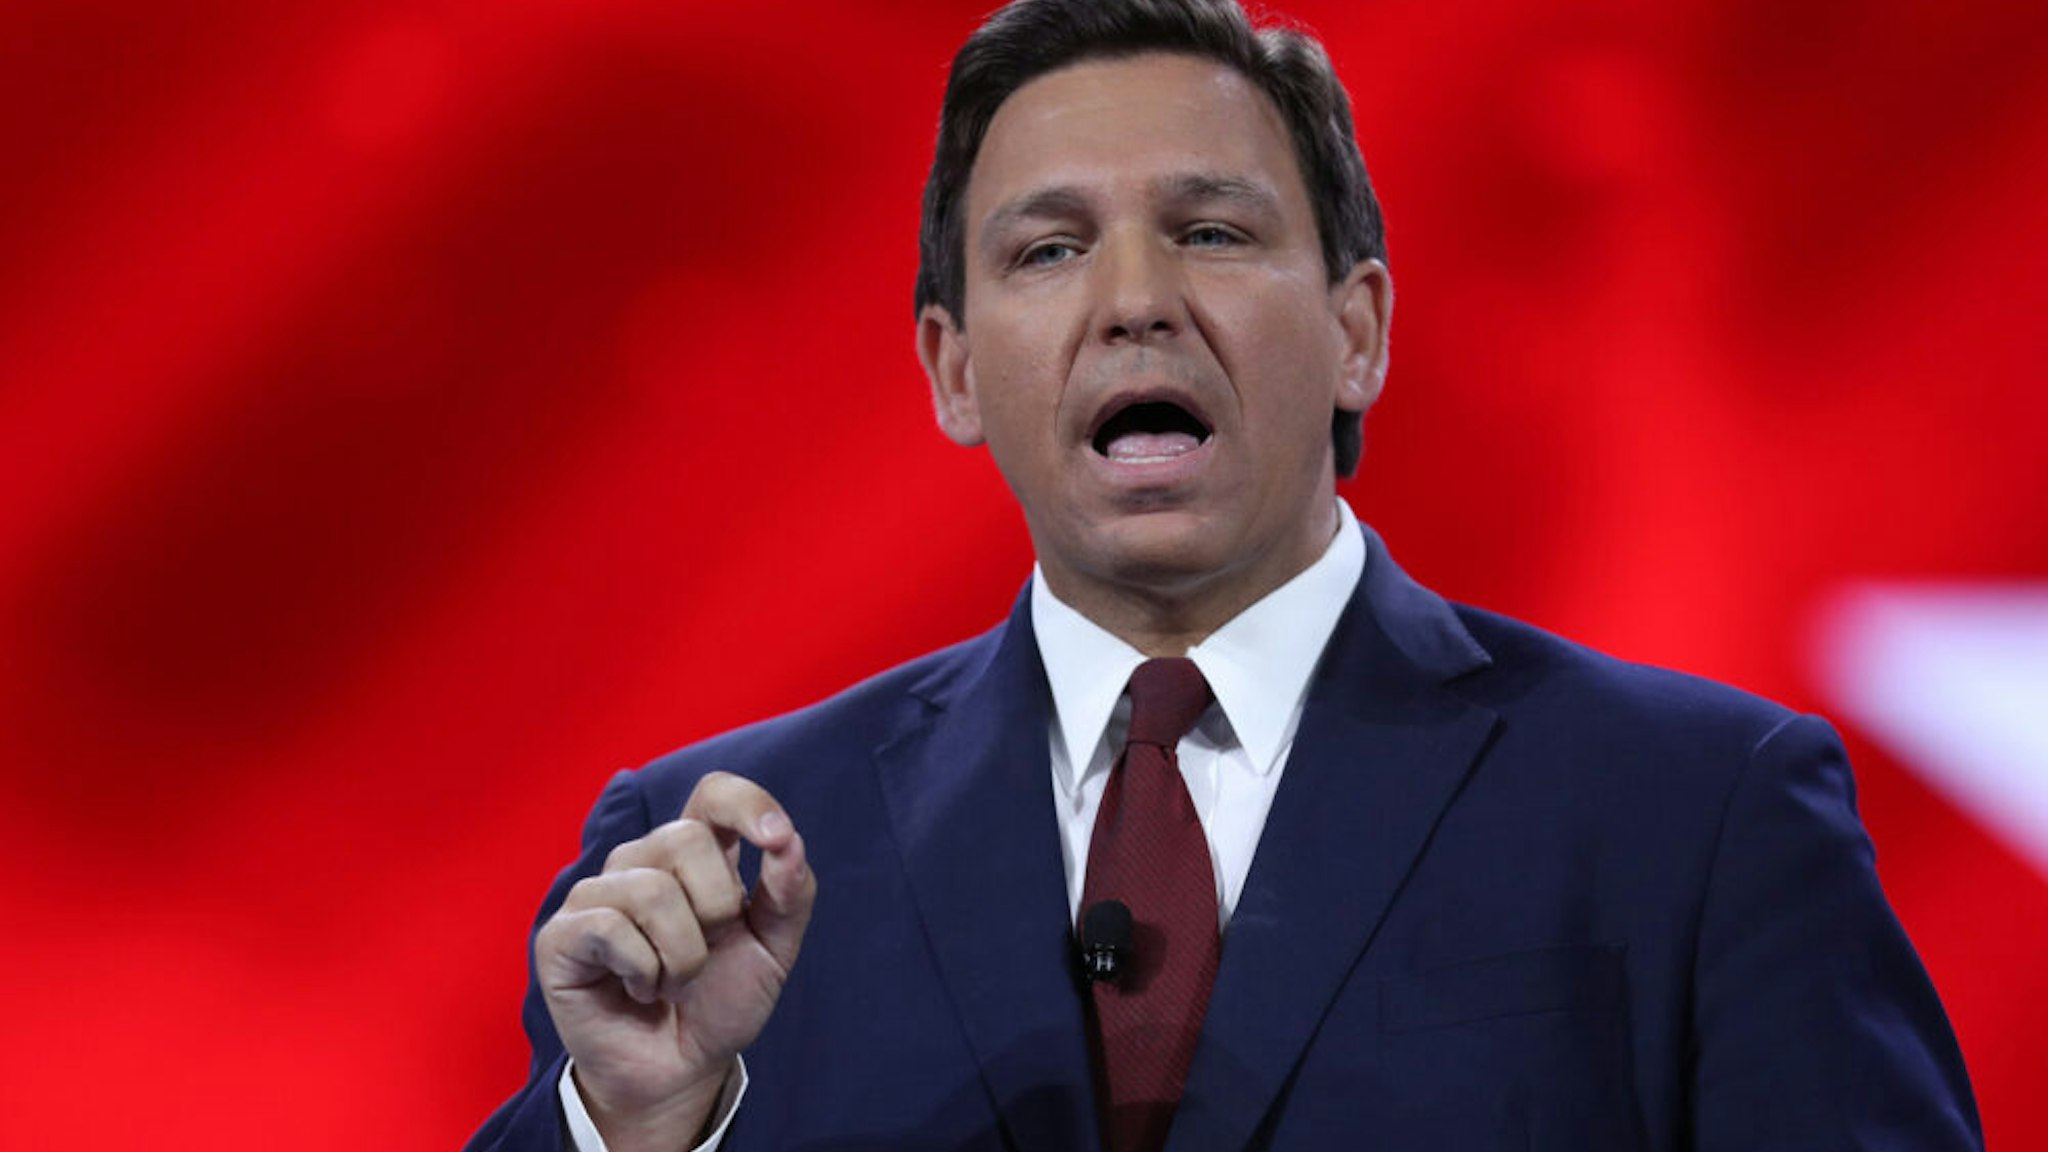 ORLANDO, FLORIDA - FEBRUARY 26: Florida Gov. Ron DeSantis speaks at the opening of the Conservative Political Action Conference at the Hyatt Regency on February 26, 2021 in Orlando, Florida. Begun in 1974, CPAC brings together conservative organizations, activists and world leaders to discuss issues important to them.